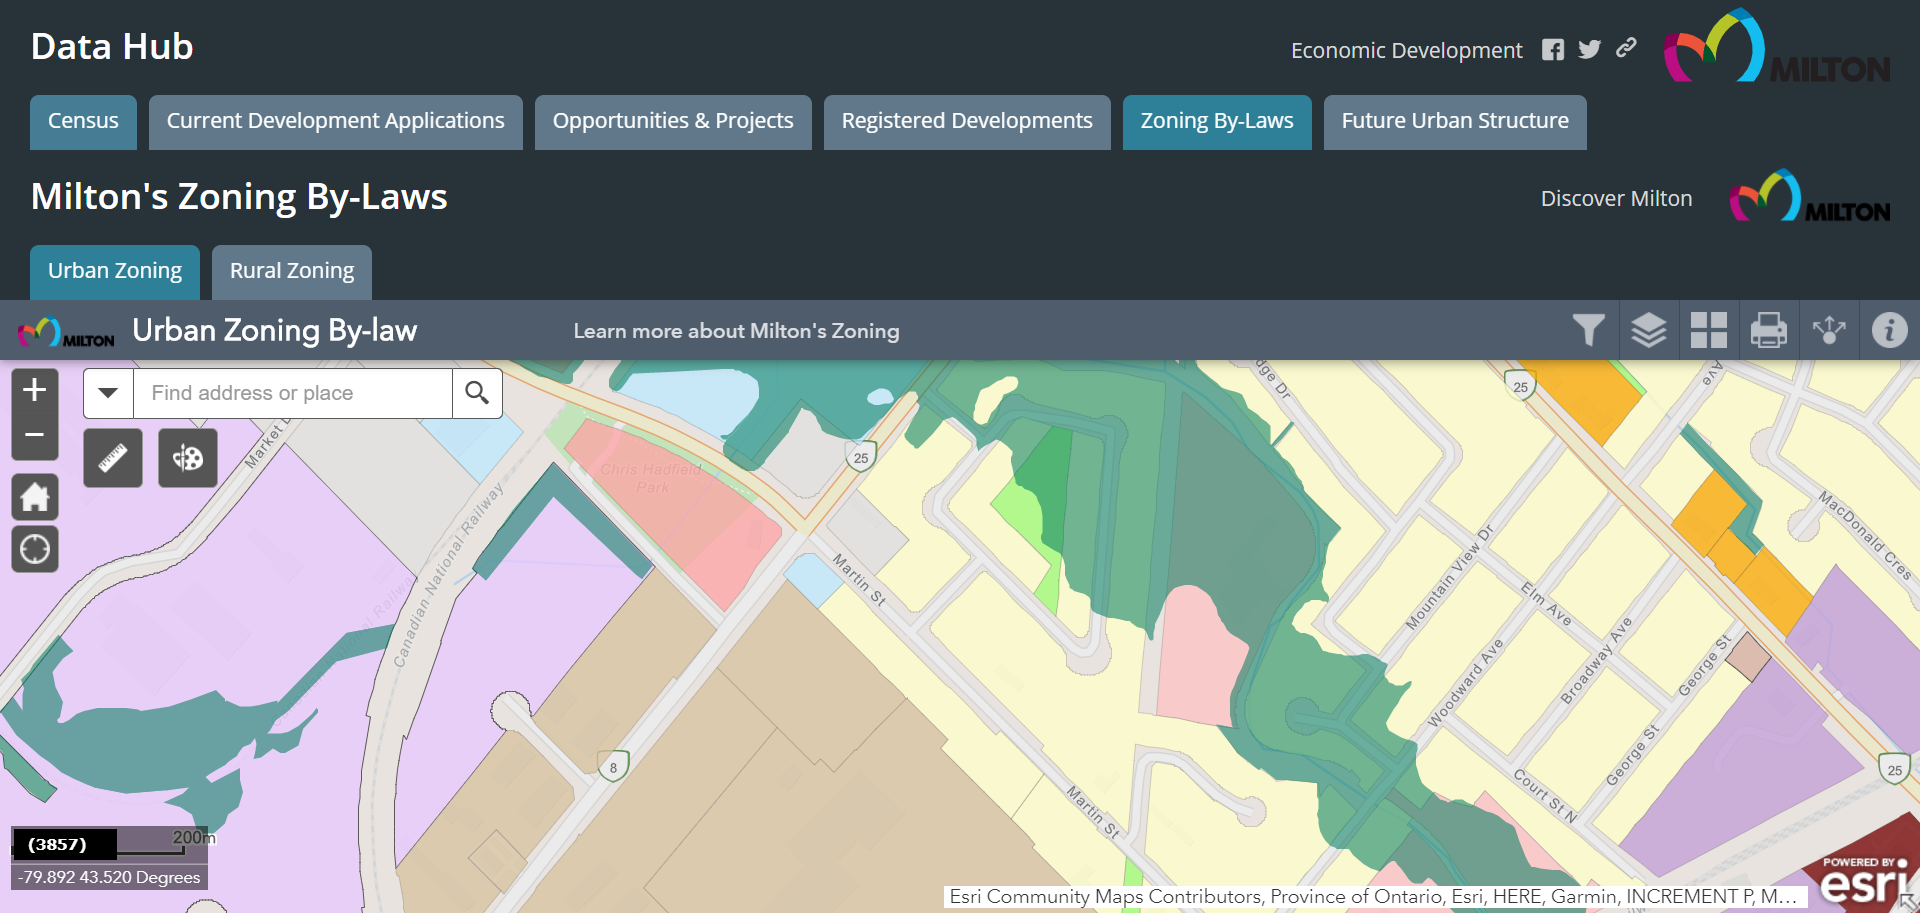 Picture of Data Hub on Zoning By-Laws tab